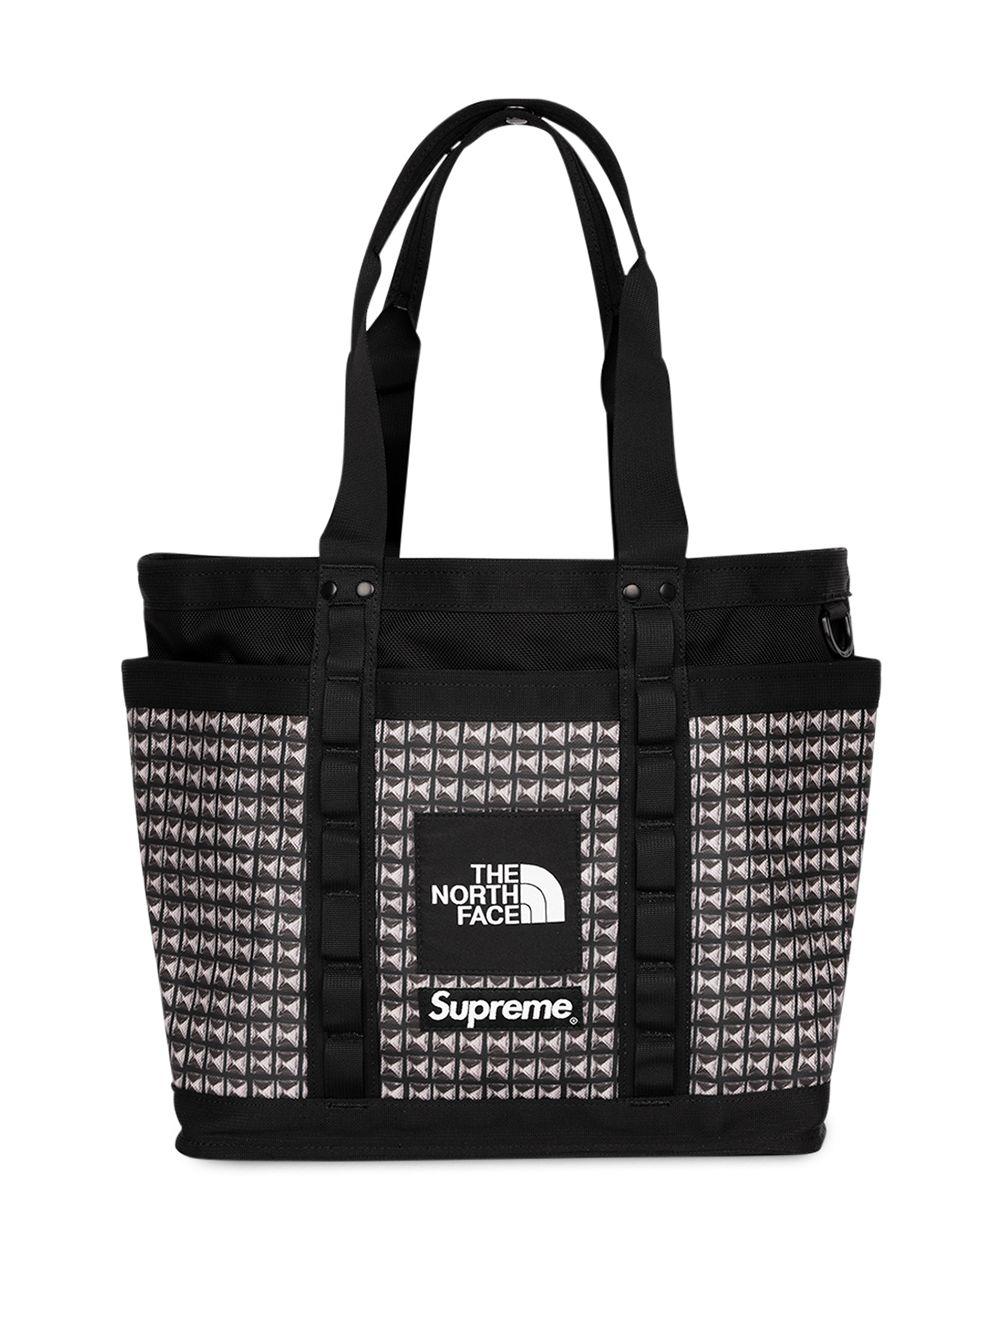 Supreme X The North Face Studded Explore Utility Tote Bag in 